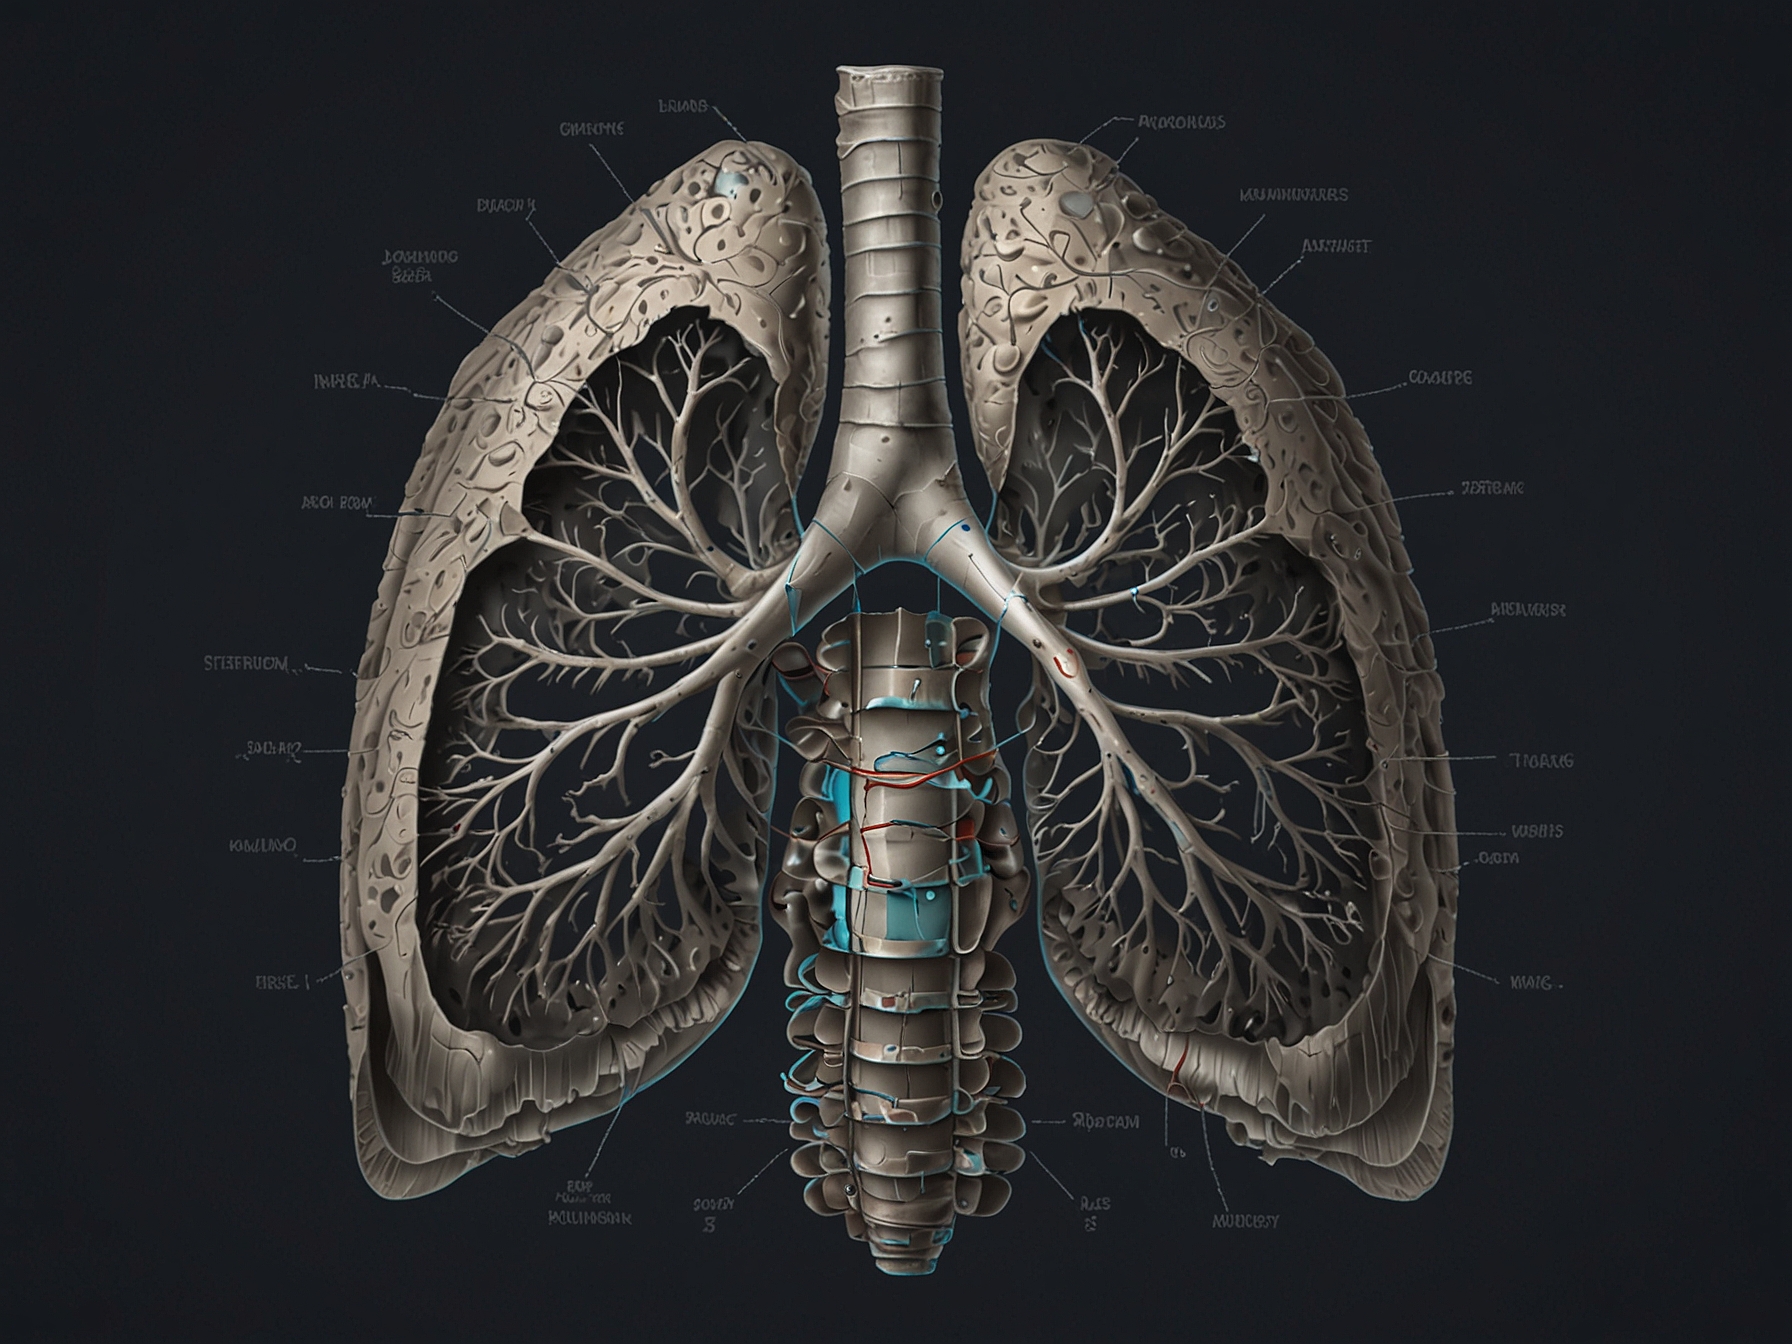 Detailed illustration of birds' lung anatomy, showcasing the unique air sac that aids in their soaring capabilities.